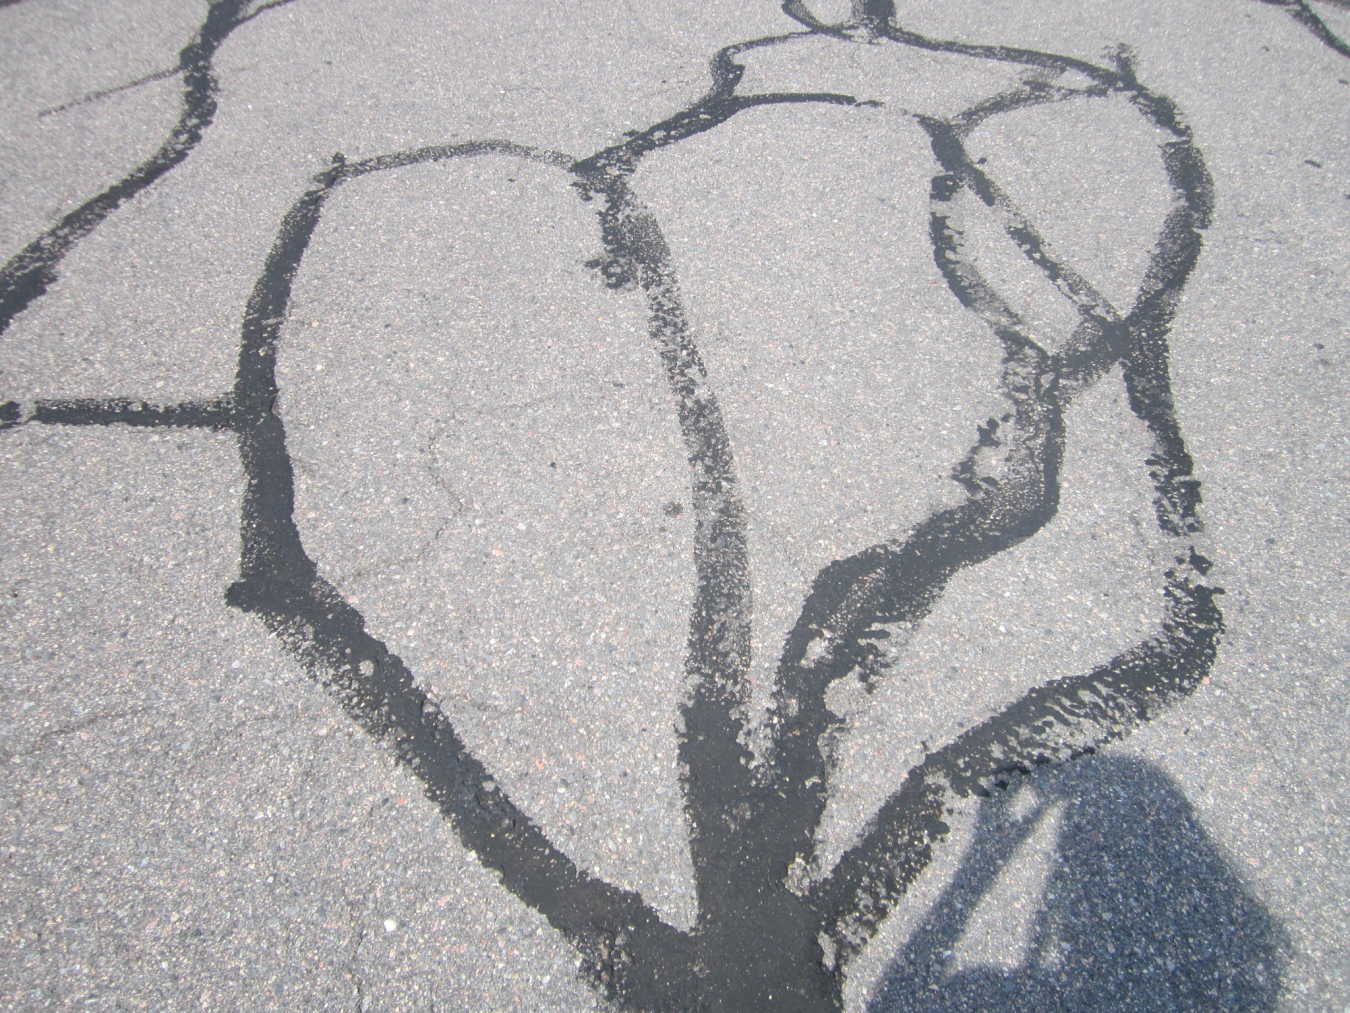 The Heart in the Parking Lot